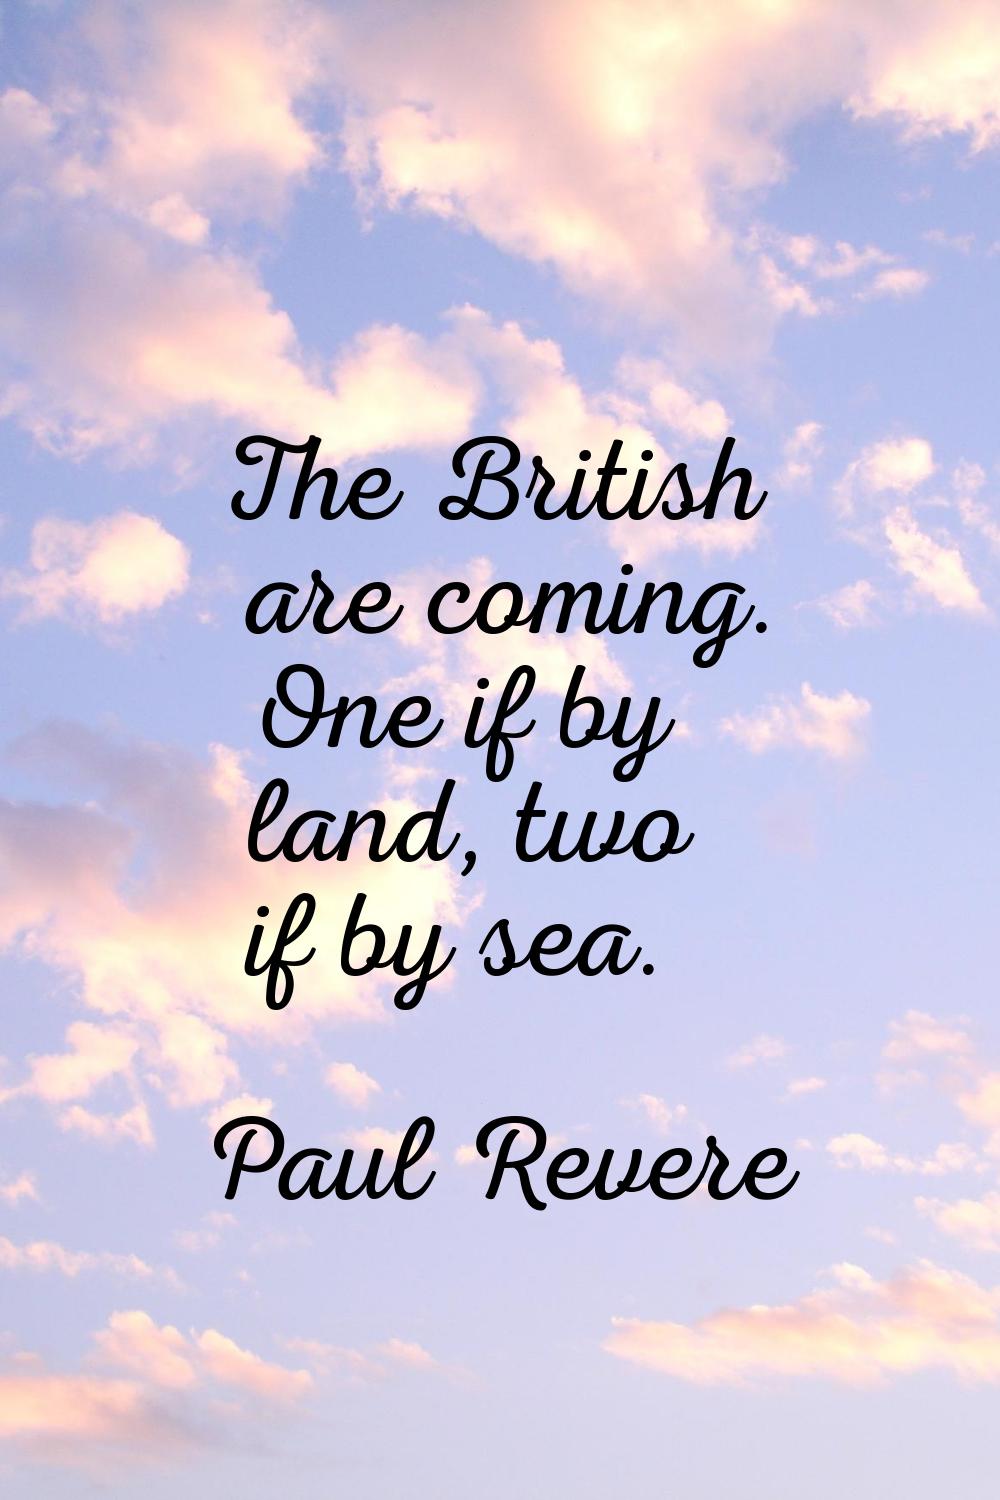 The British are coming. One if by land, two if by sea.